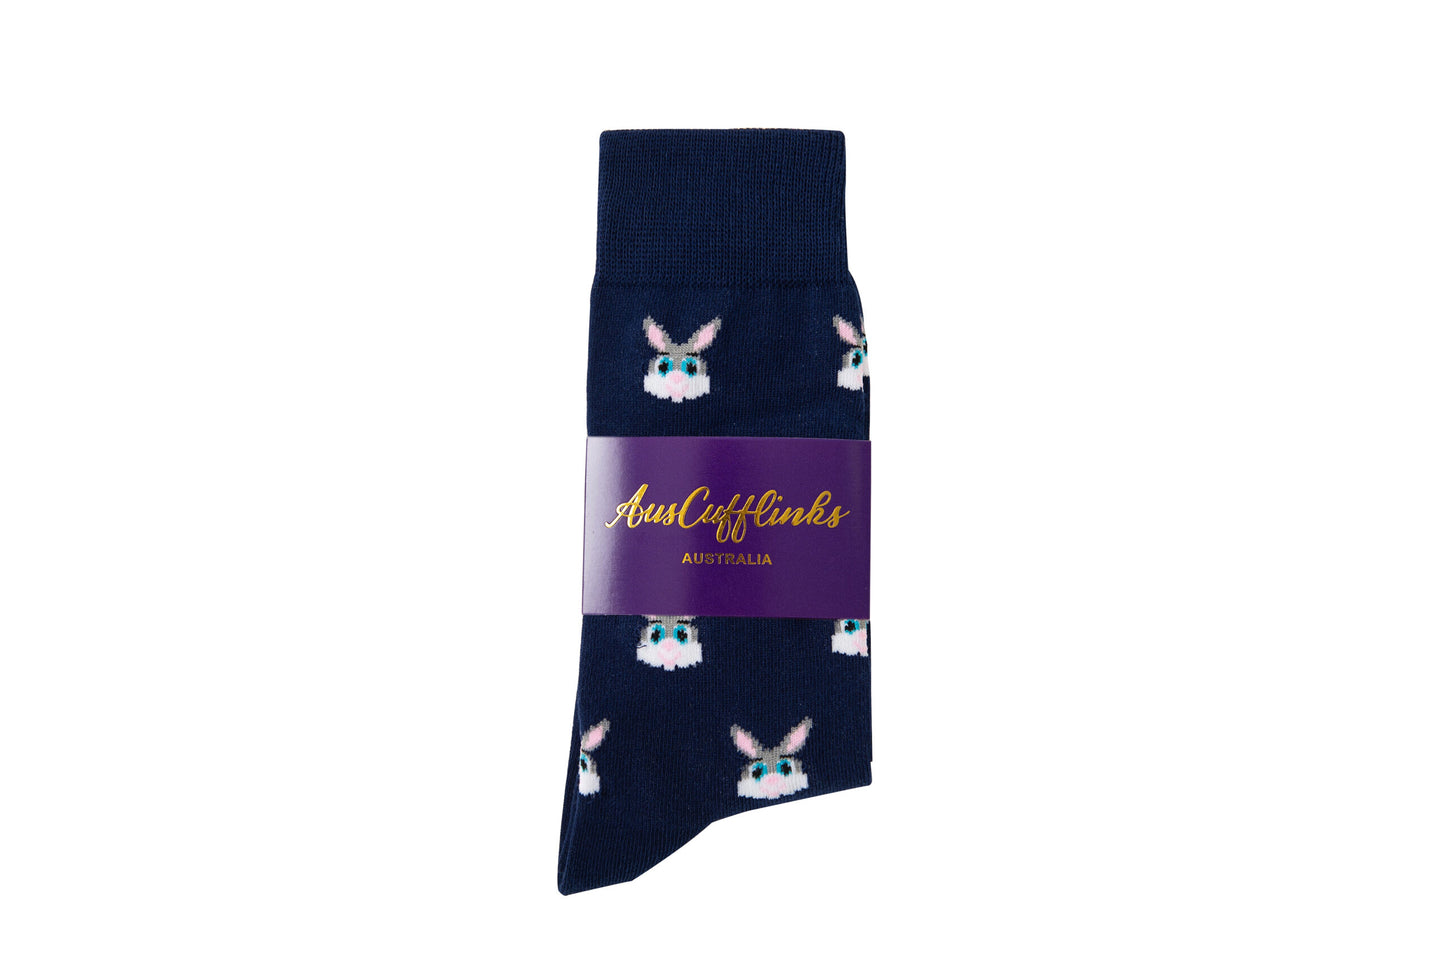 A Bunny Sock with a purple label.